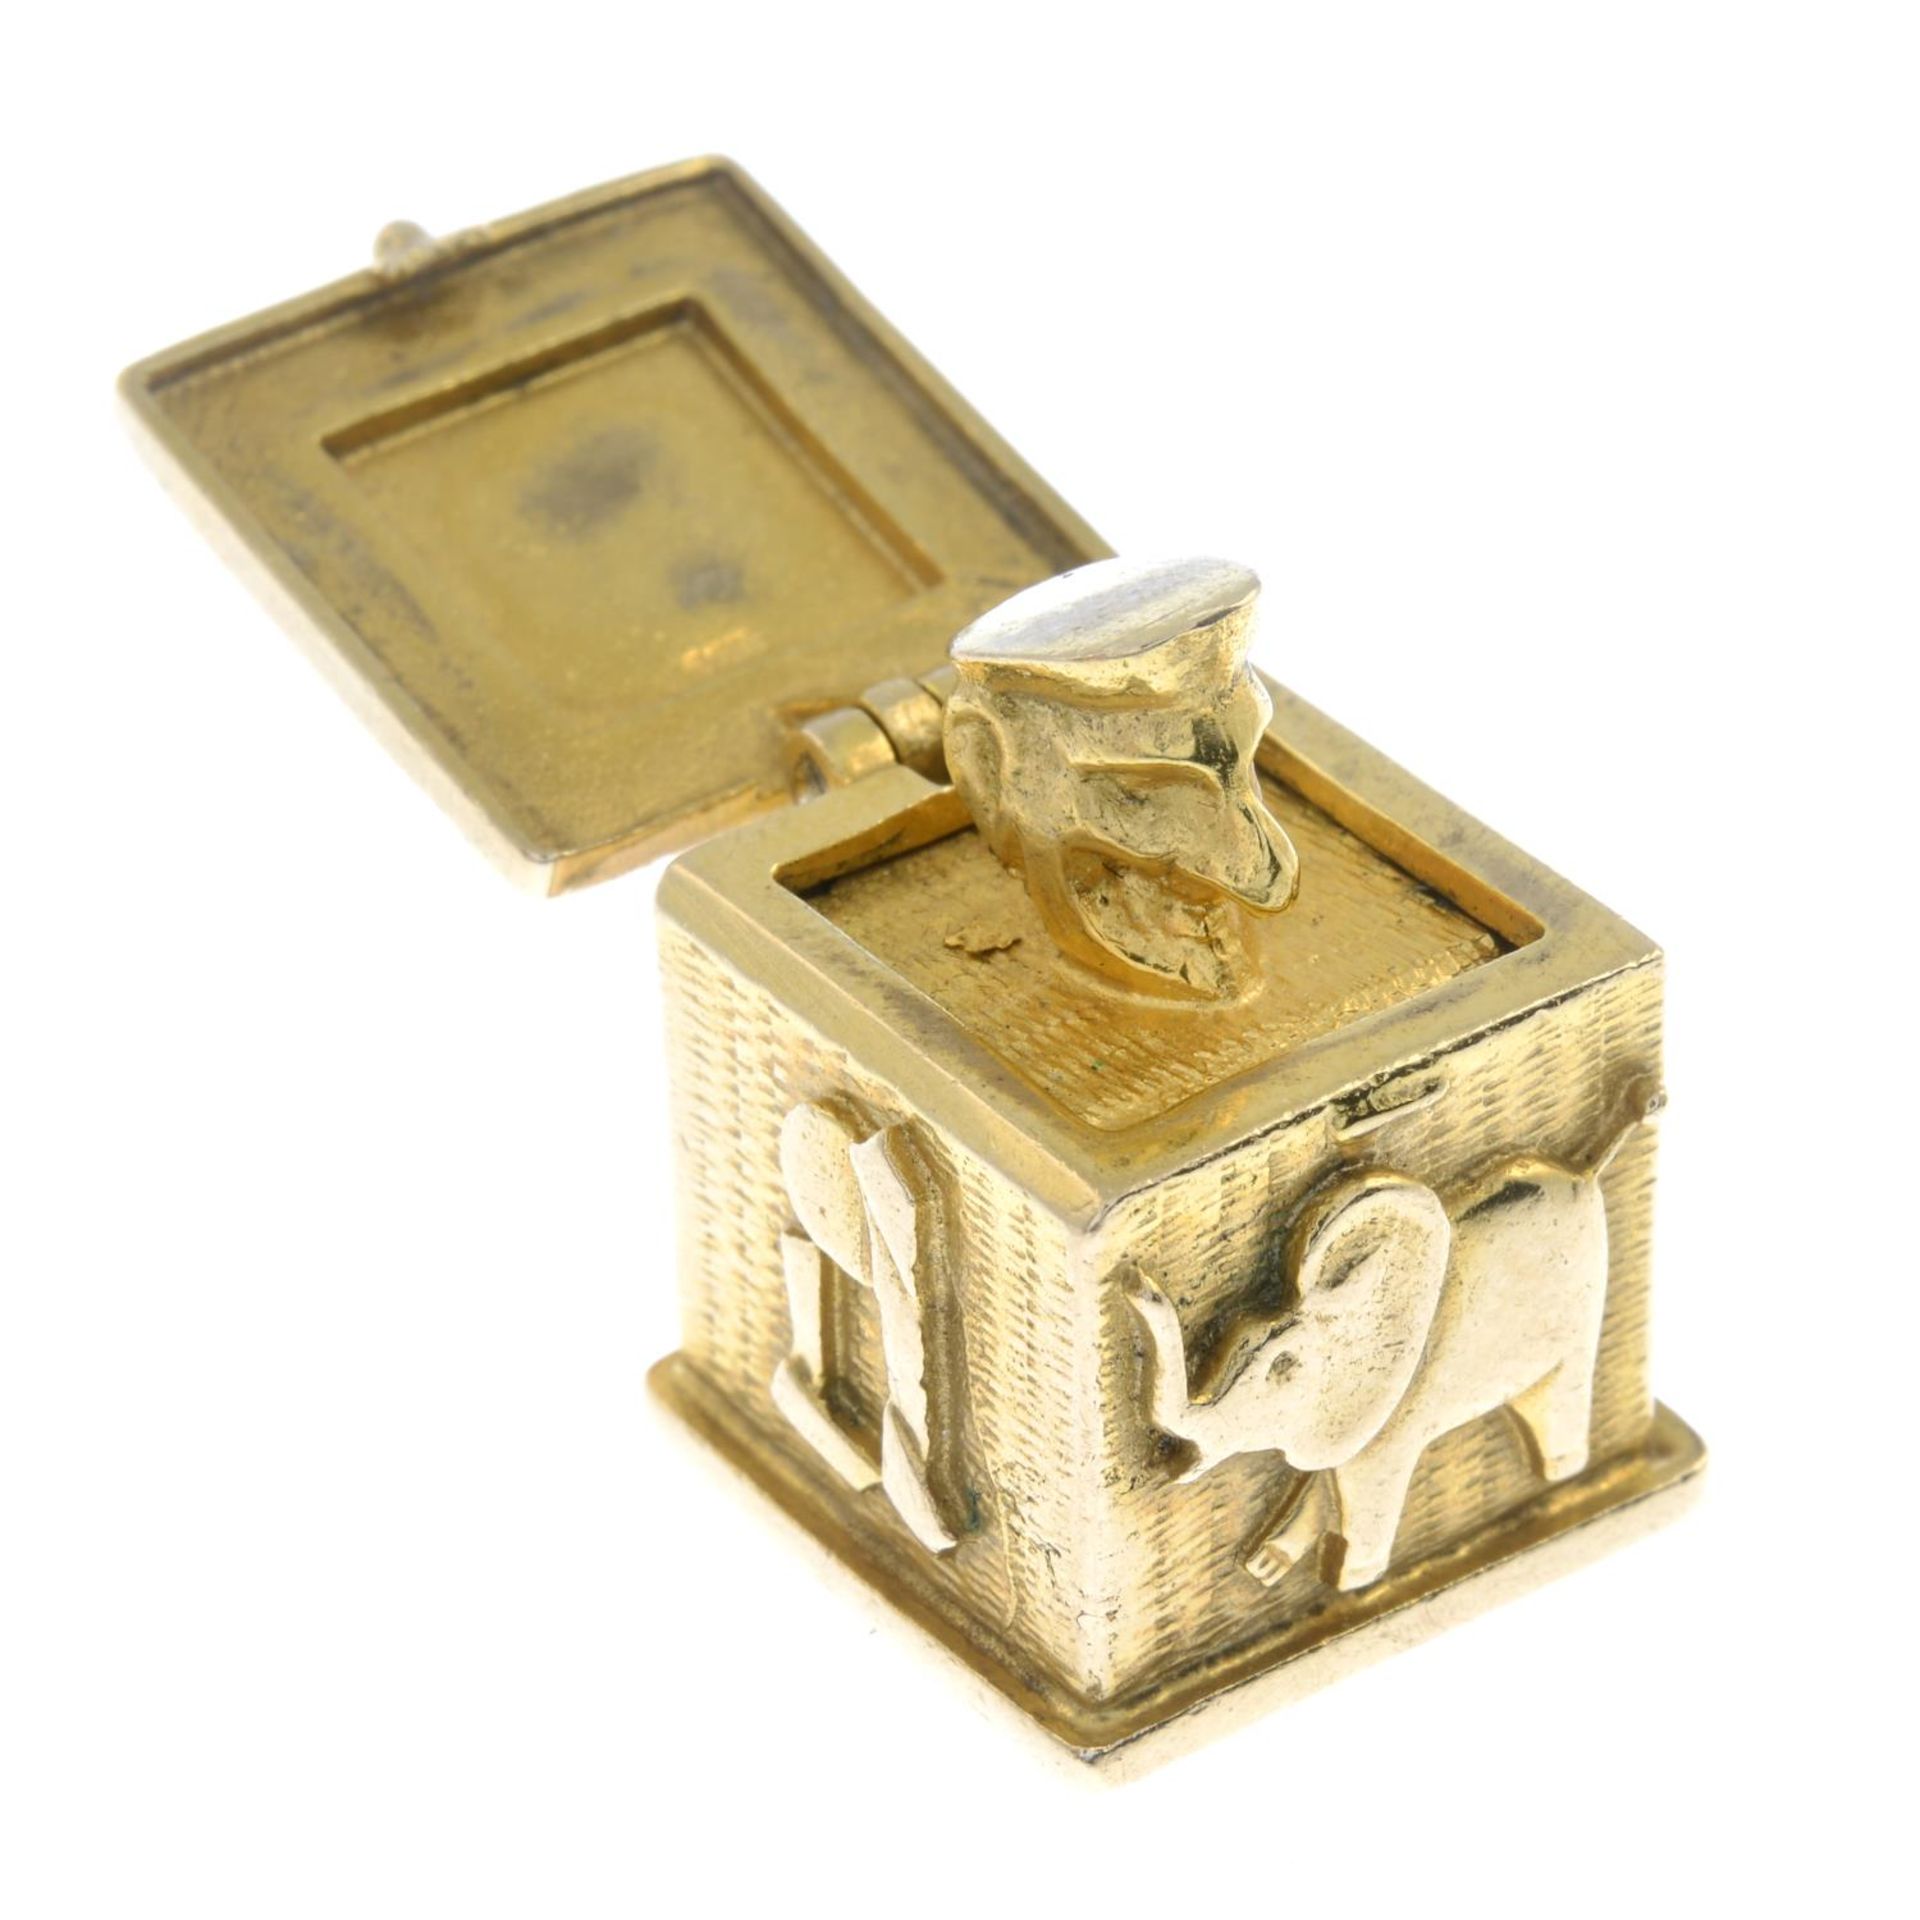 A 9ct gold Jack-in-the-box charm,